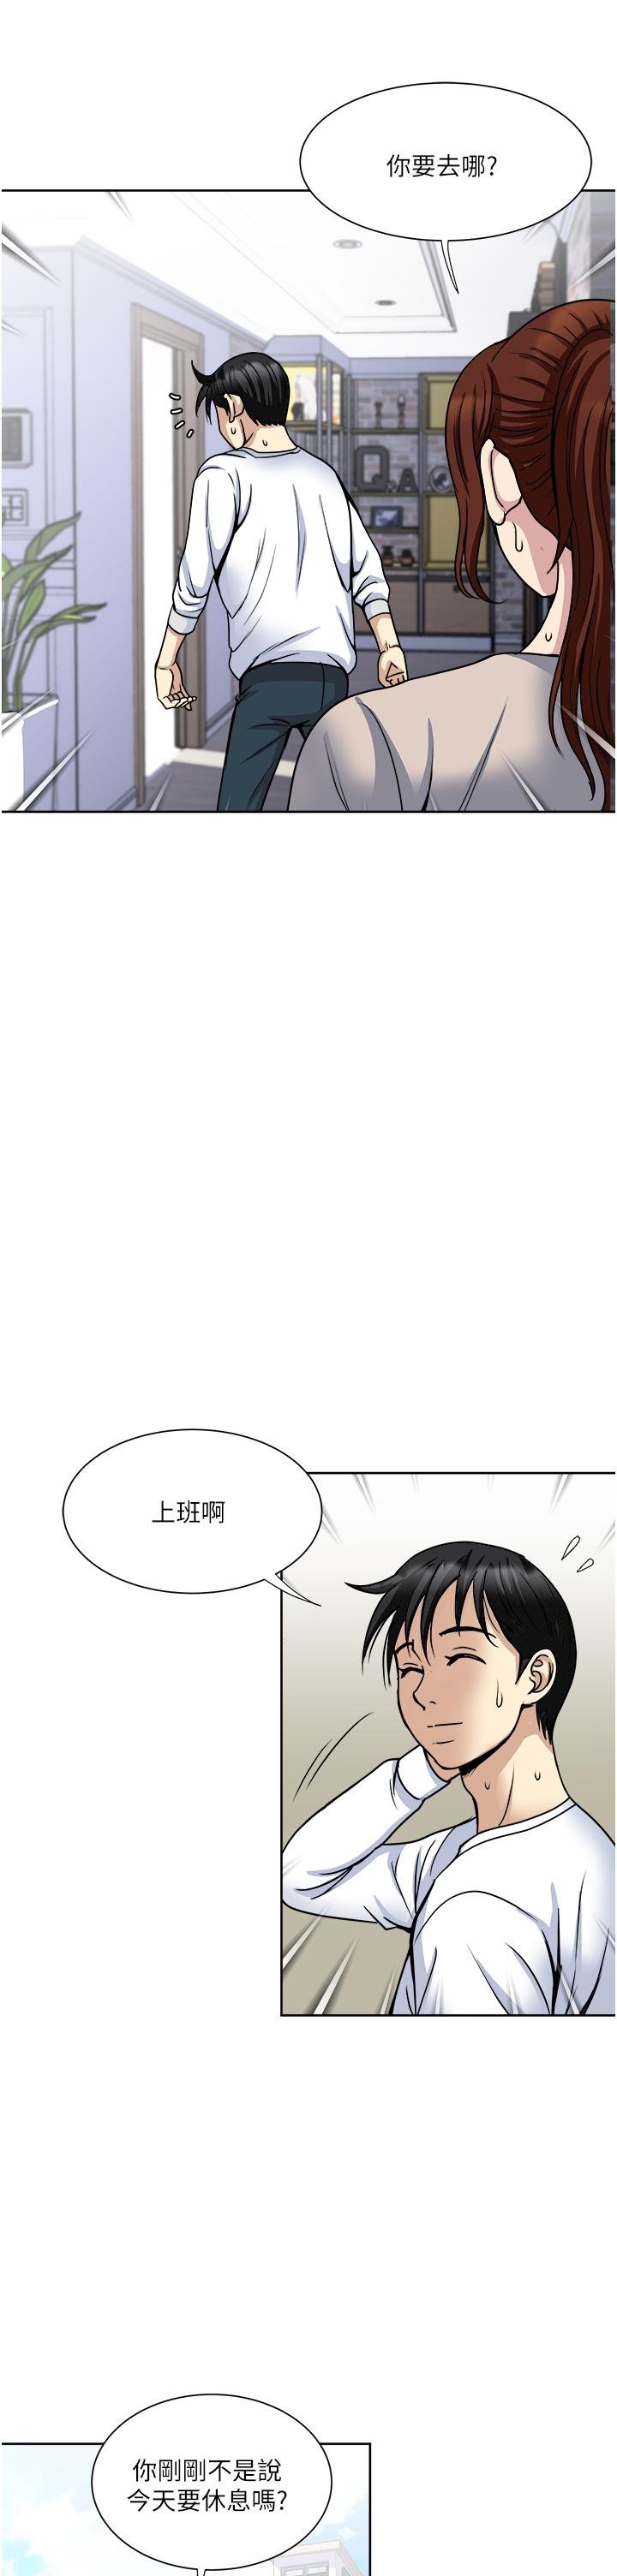 just-once-raw-chap-36-10